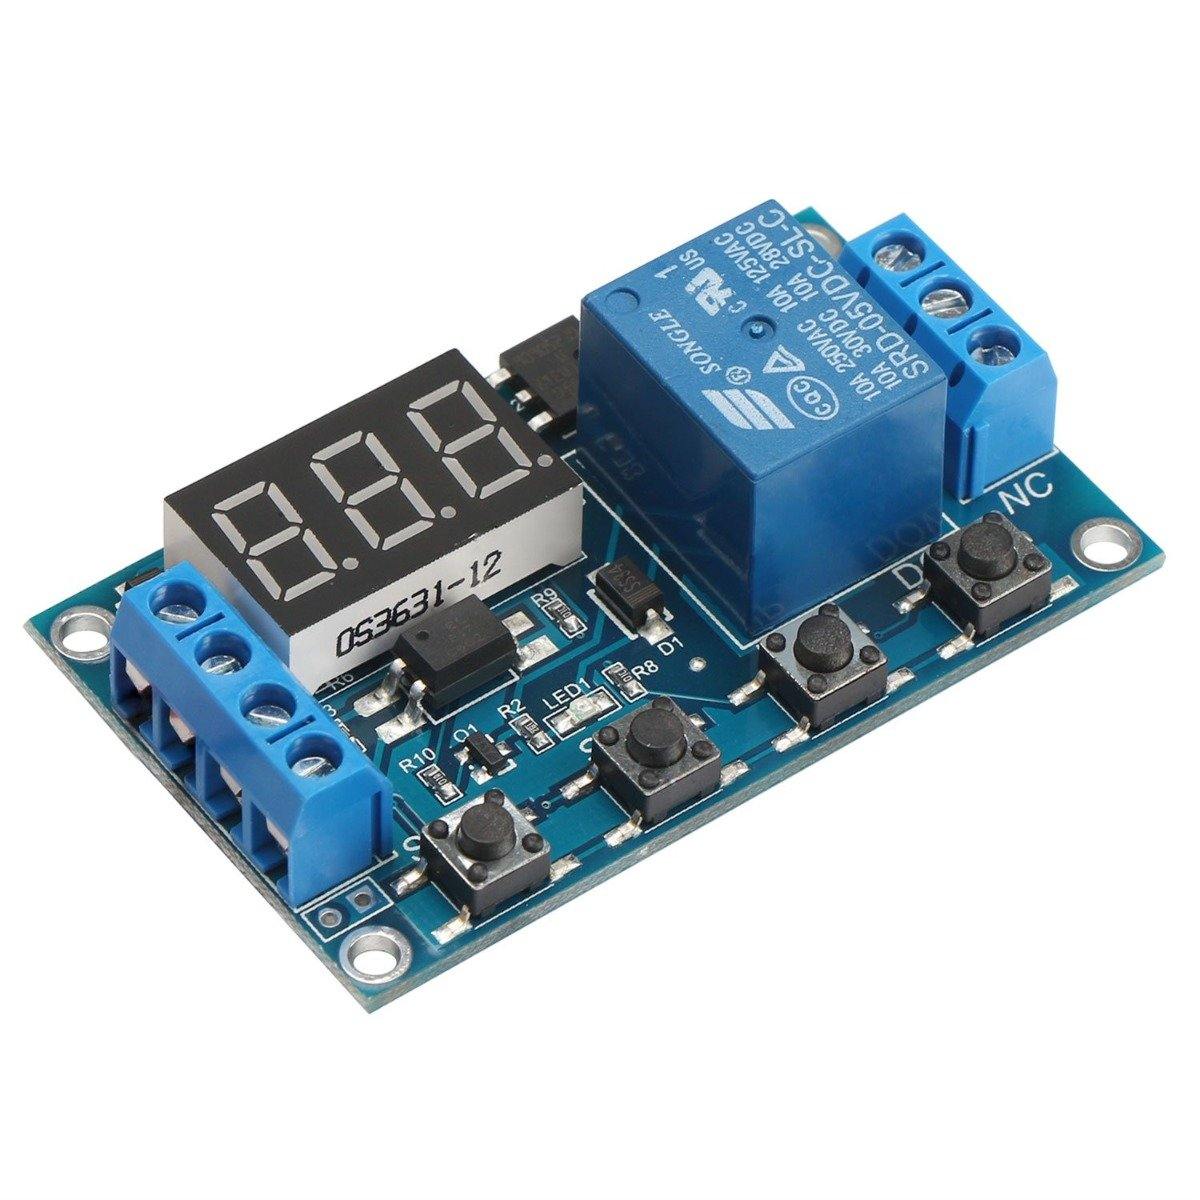 Buy DC 6-30V One Way Relay Module with Trigger Delay Online in India ...